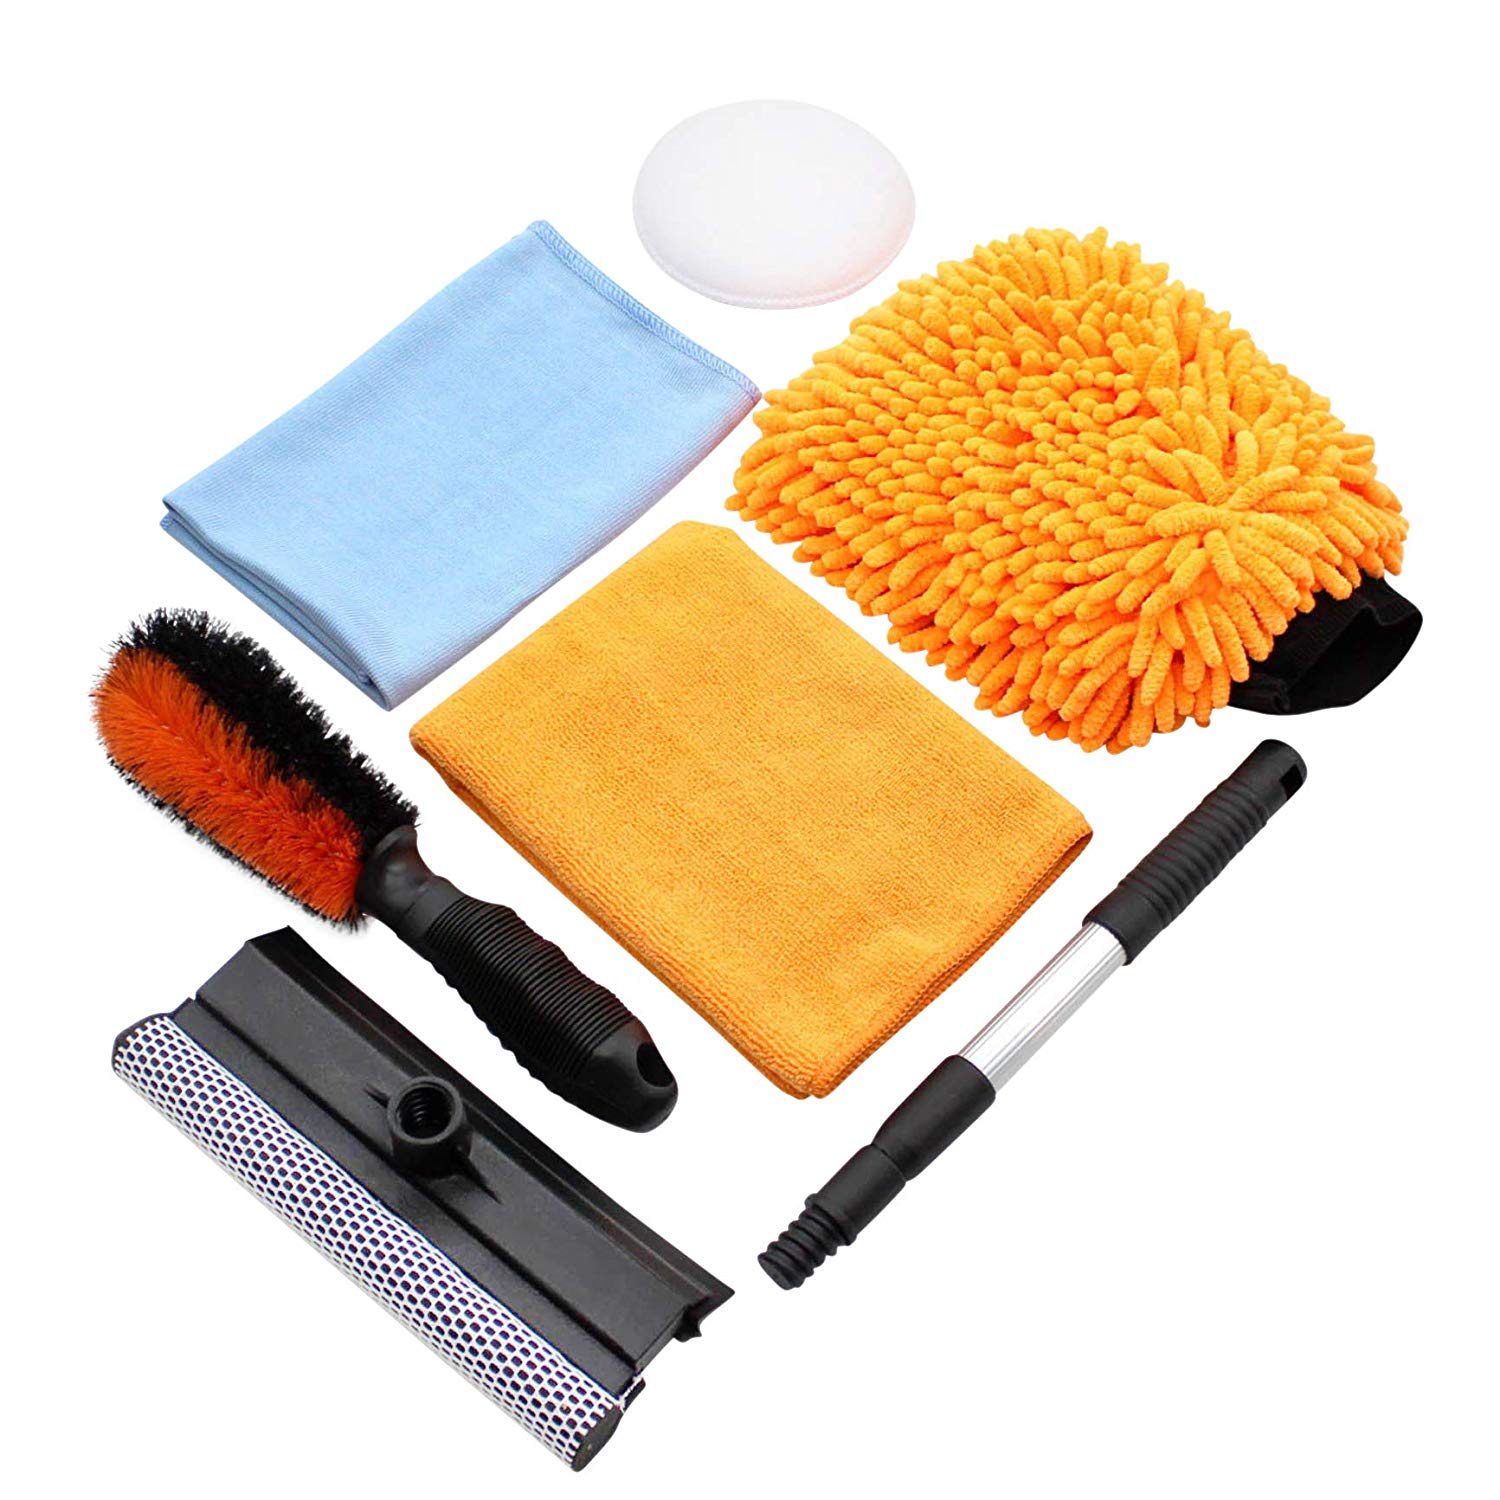 Scrubit Car Cleaning Tools Kit by Scrub it- squeegee Car Wash Brush, Wheel  Brush, Microfiber Wash Mitt and Cloth - For Your Next Vehicle Wash and Wax